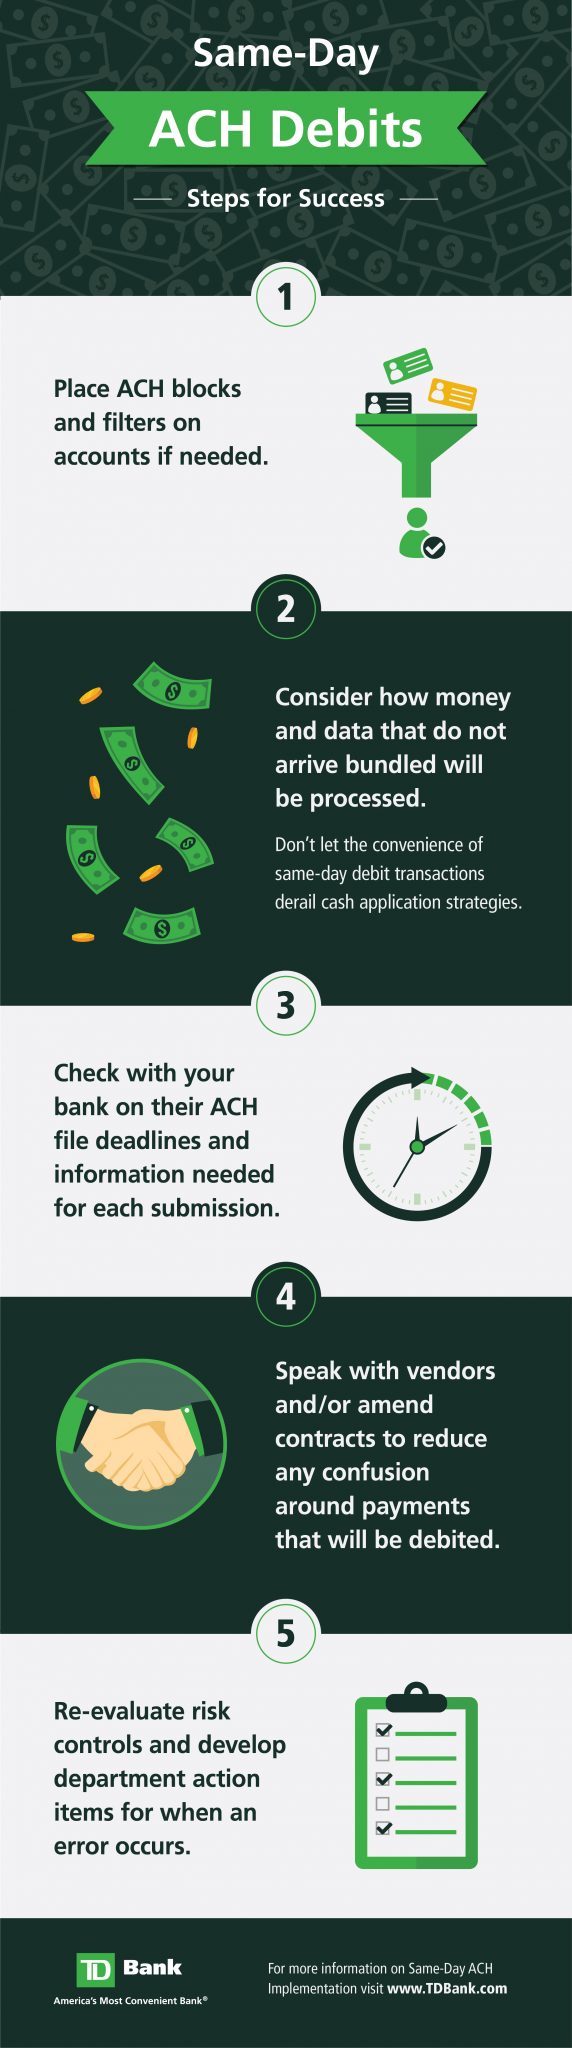 ACH Debits Infographic TD Bank